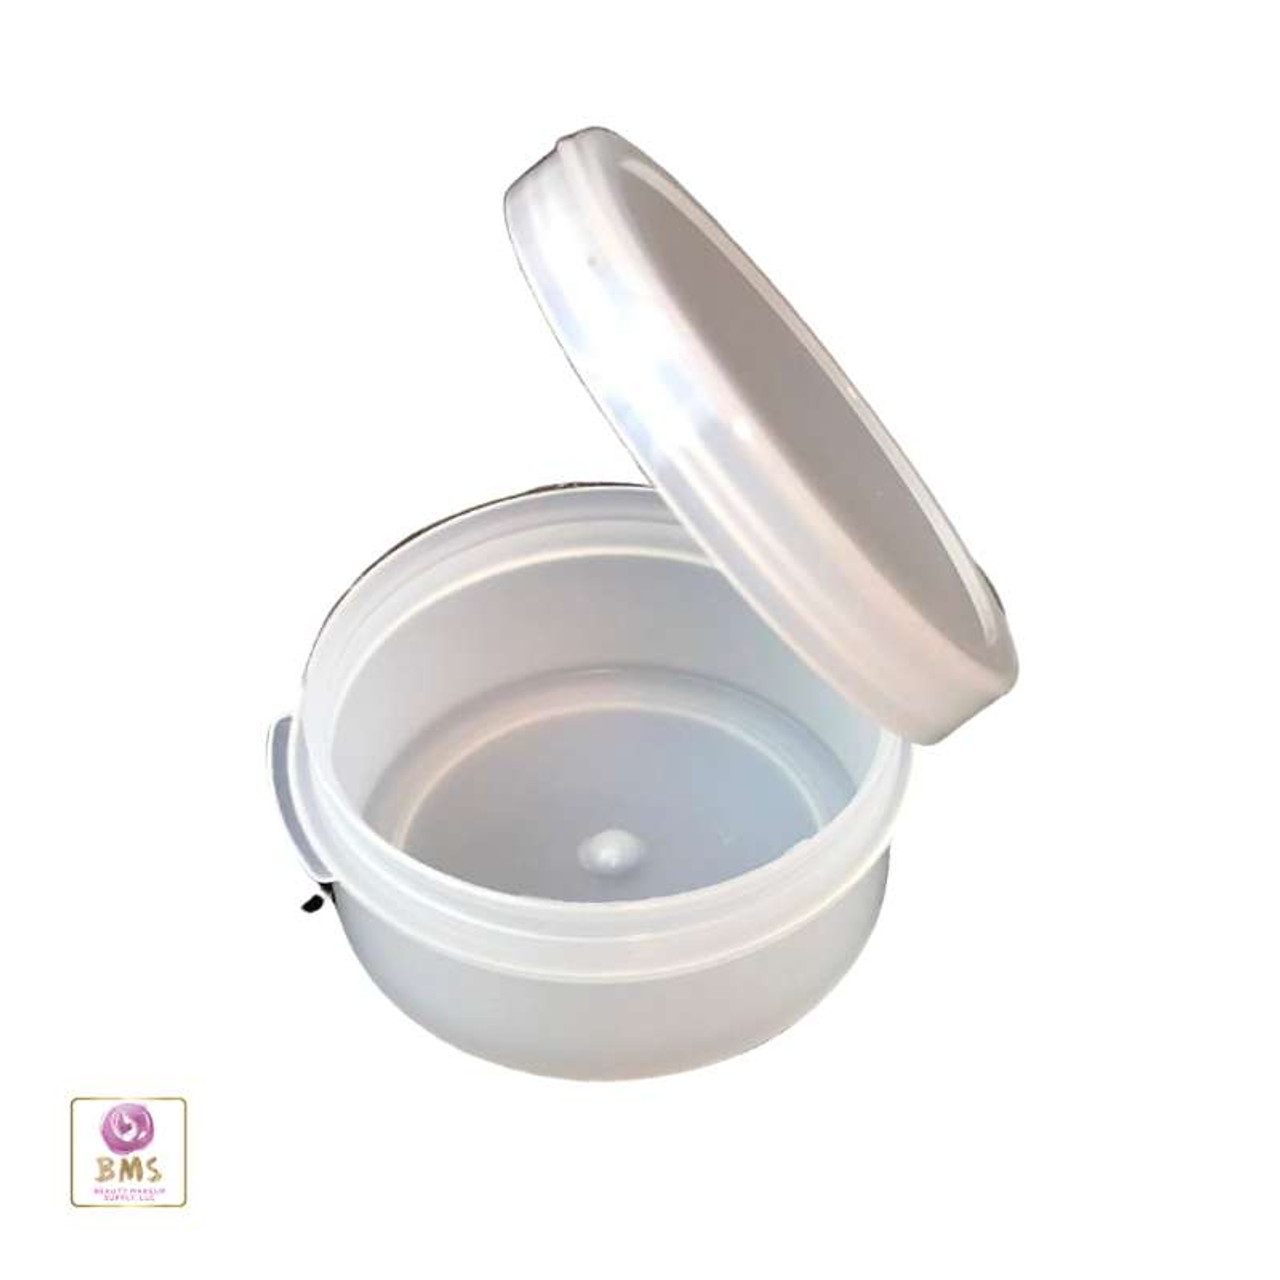 Cosmetic Hinged Lid Jars Beauty Containers - 10 ml (Natural / White / Black) • 5098 / 5095 / 5099